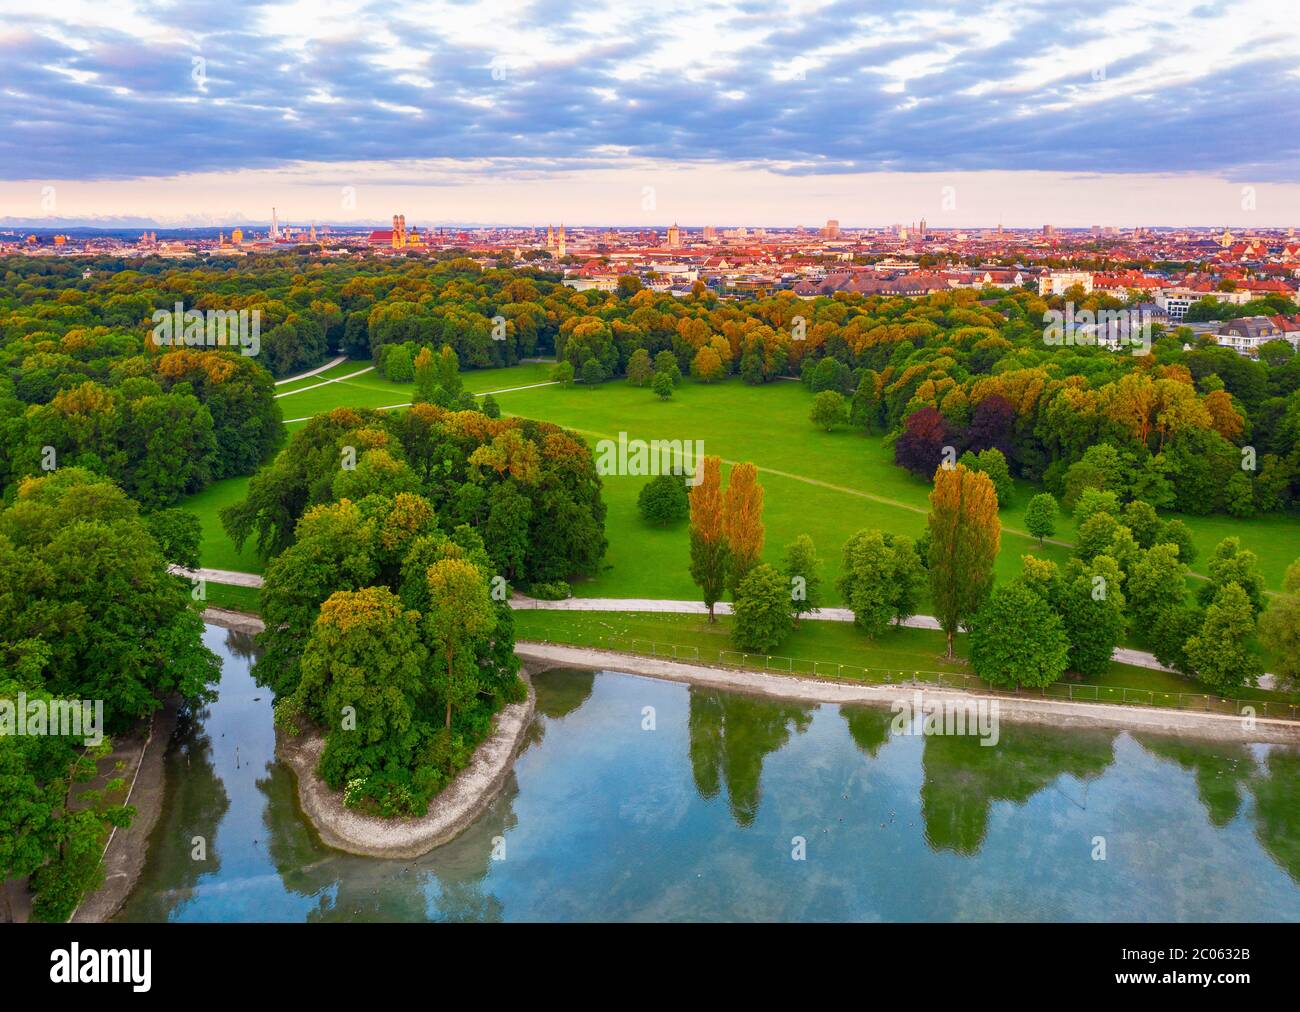 Kleinhesseloher See, English Garden, view over the old town and Maxvorstadt in the morning light, Munich, aerial view, Upper Bavaria, Bavaria, Germany Stock Photo